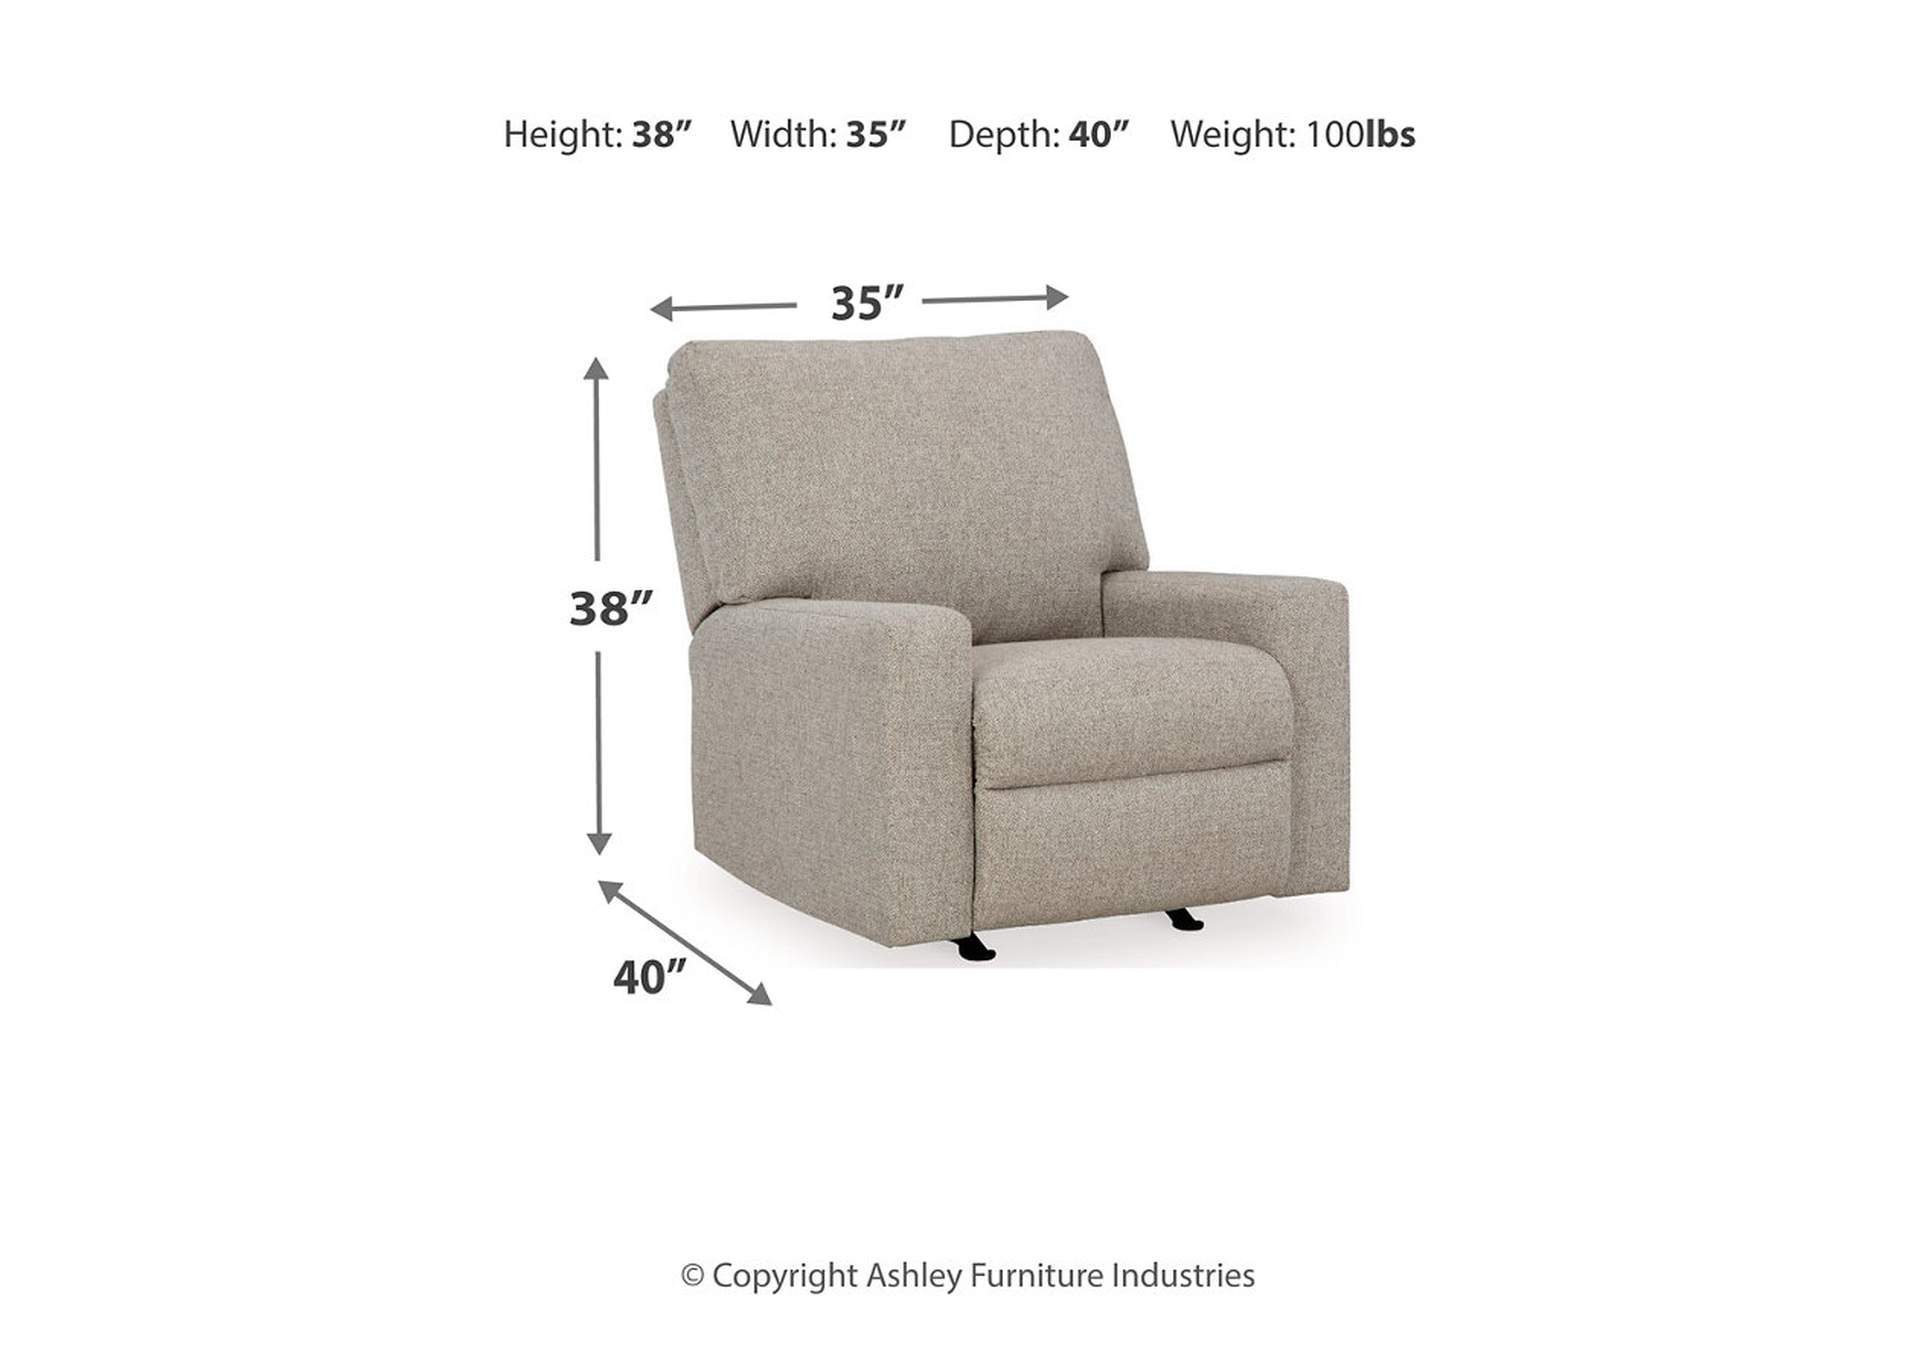 Reydell Recliner,Signature Design By Ashley